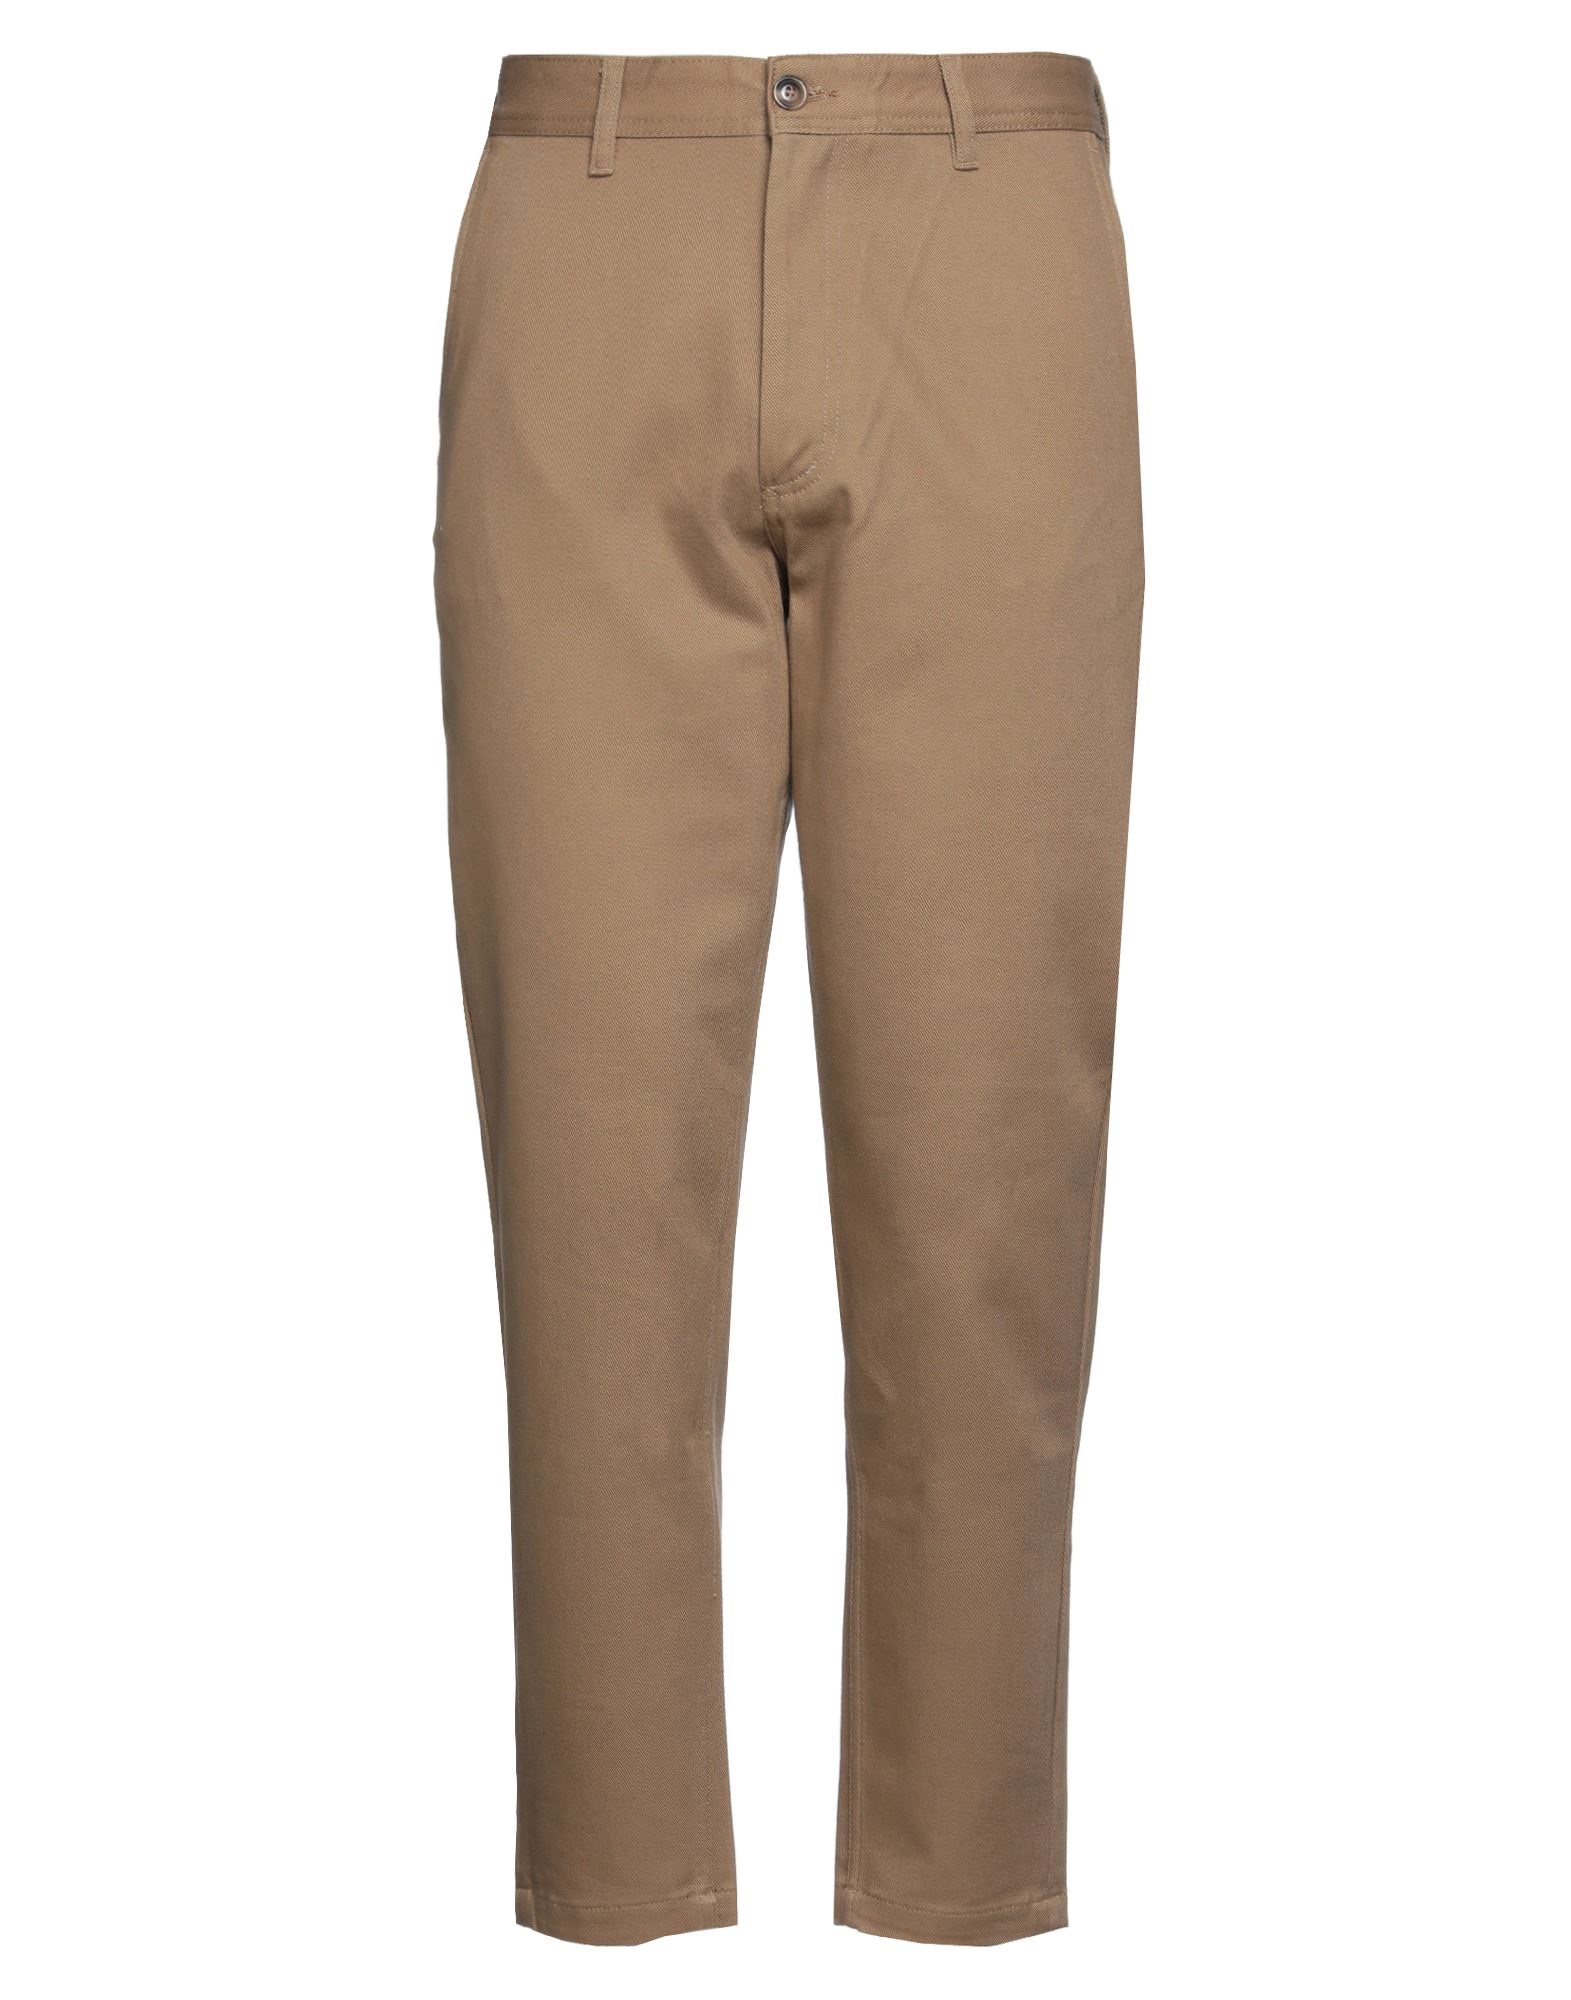 SELECTED HOMME SELECTED HOMME MAN PANTS CAMEL SIZE 32W-32L COTTON